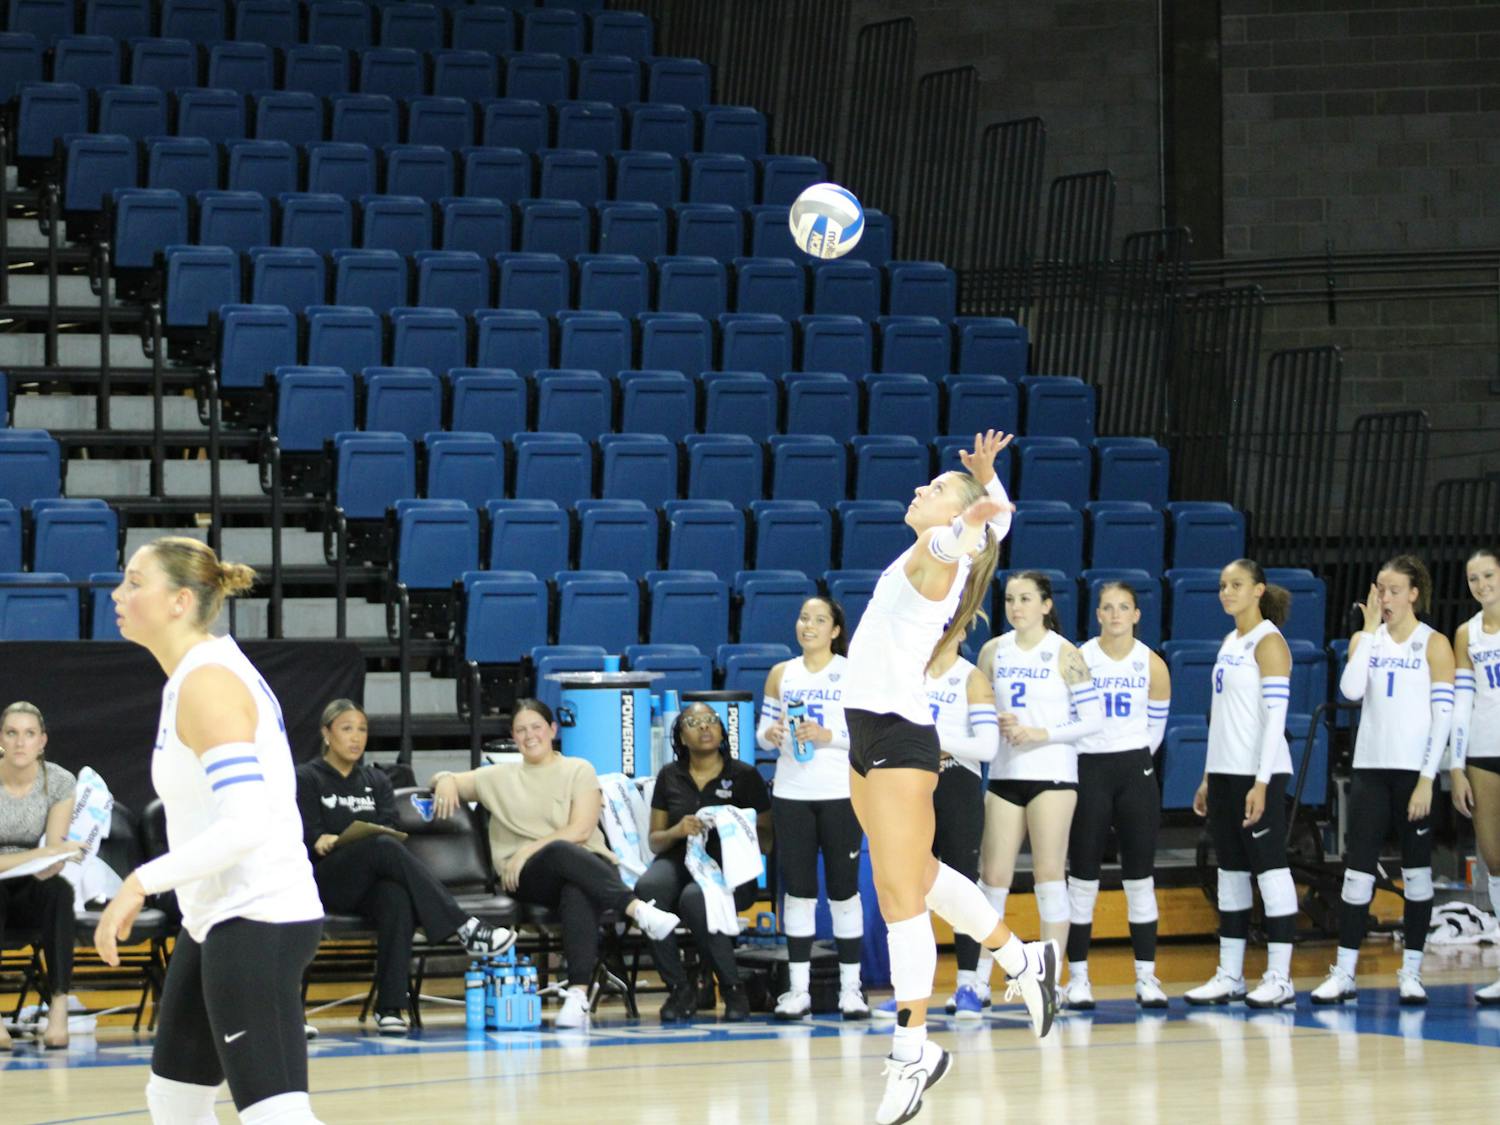 UB women's volleyball clinched a MAC Tournament berth over the weekend.